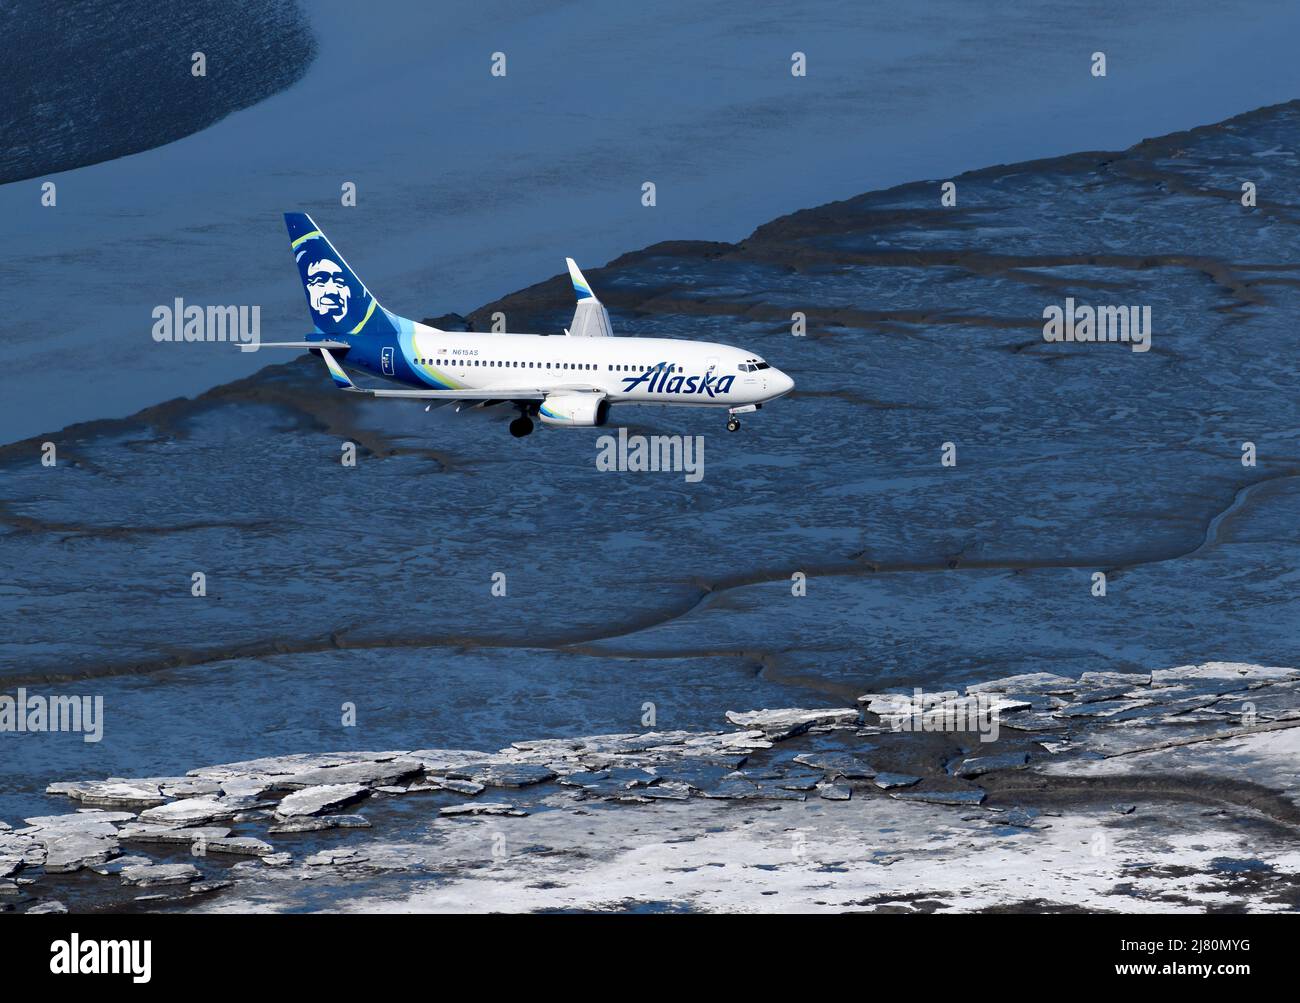 Alaska Airlines Boeing 737 airplane from above. Aircraft of Alaska Airlines aerial view over water. Stock Photo